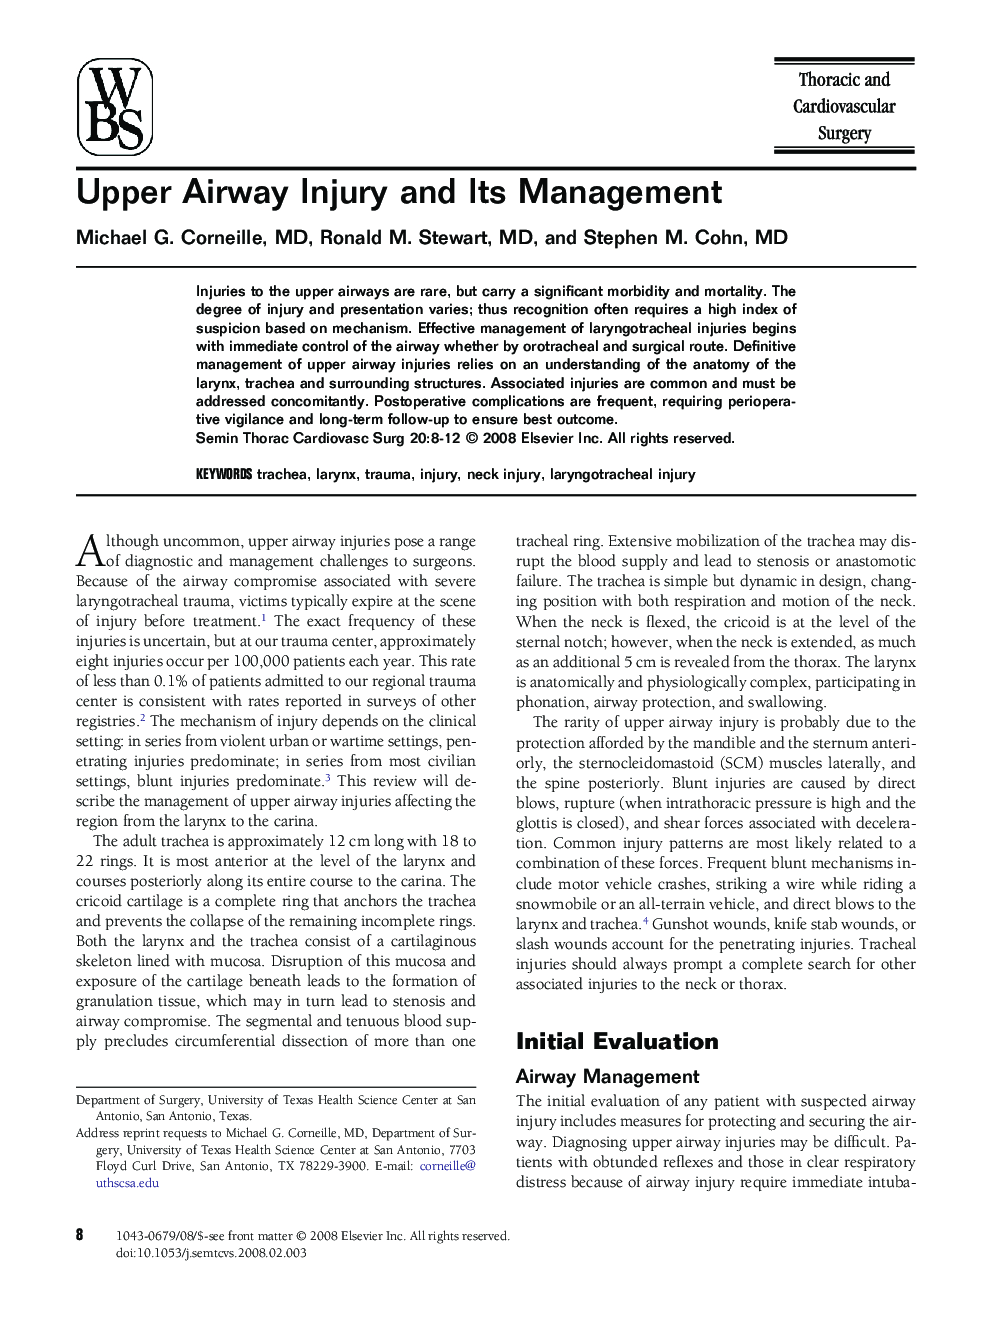 Upper Airway Injury and Its Management